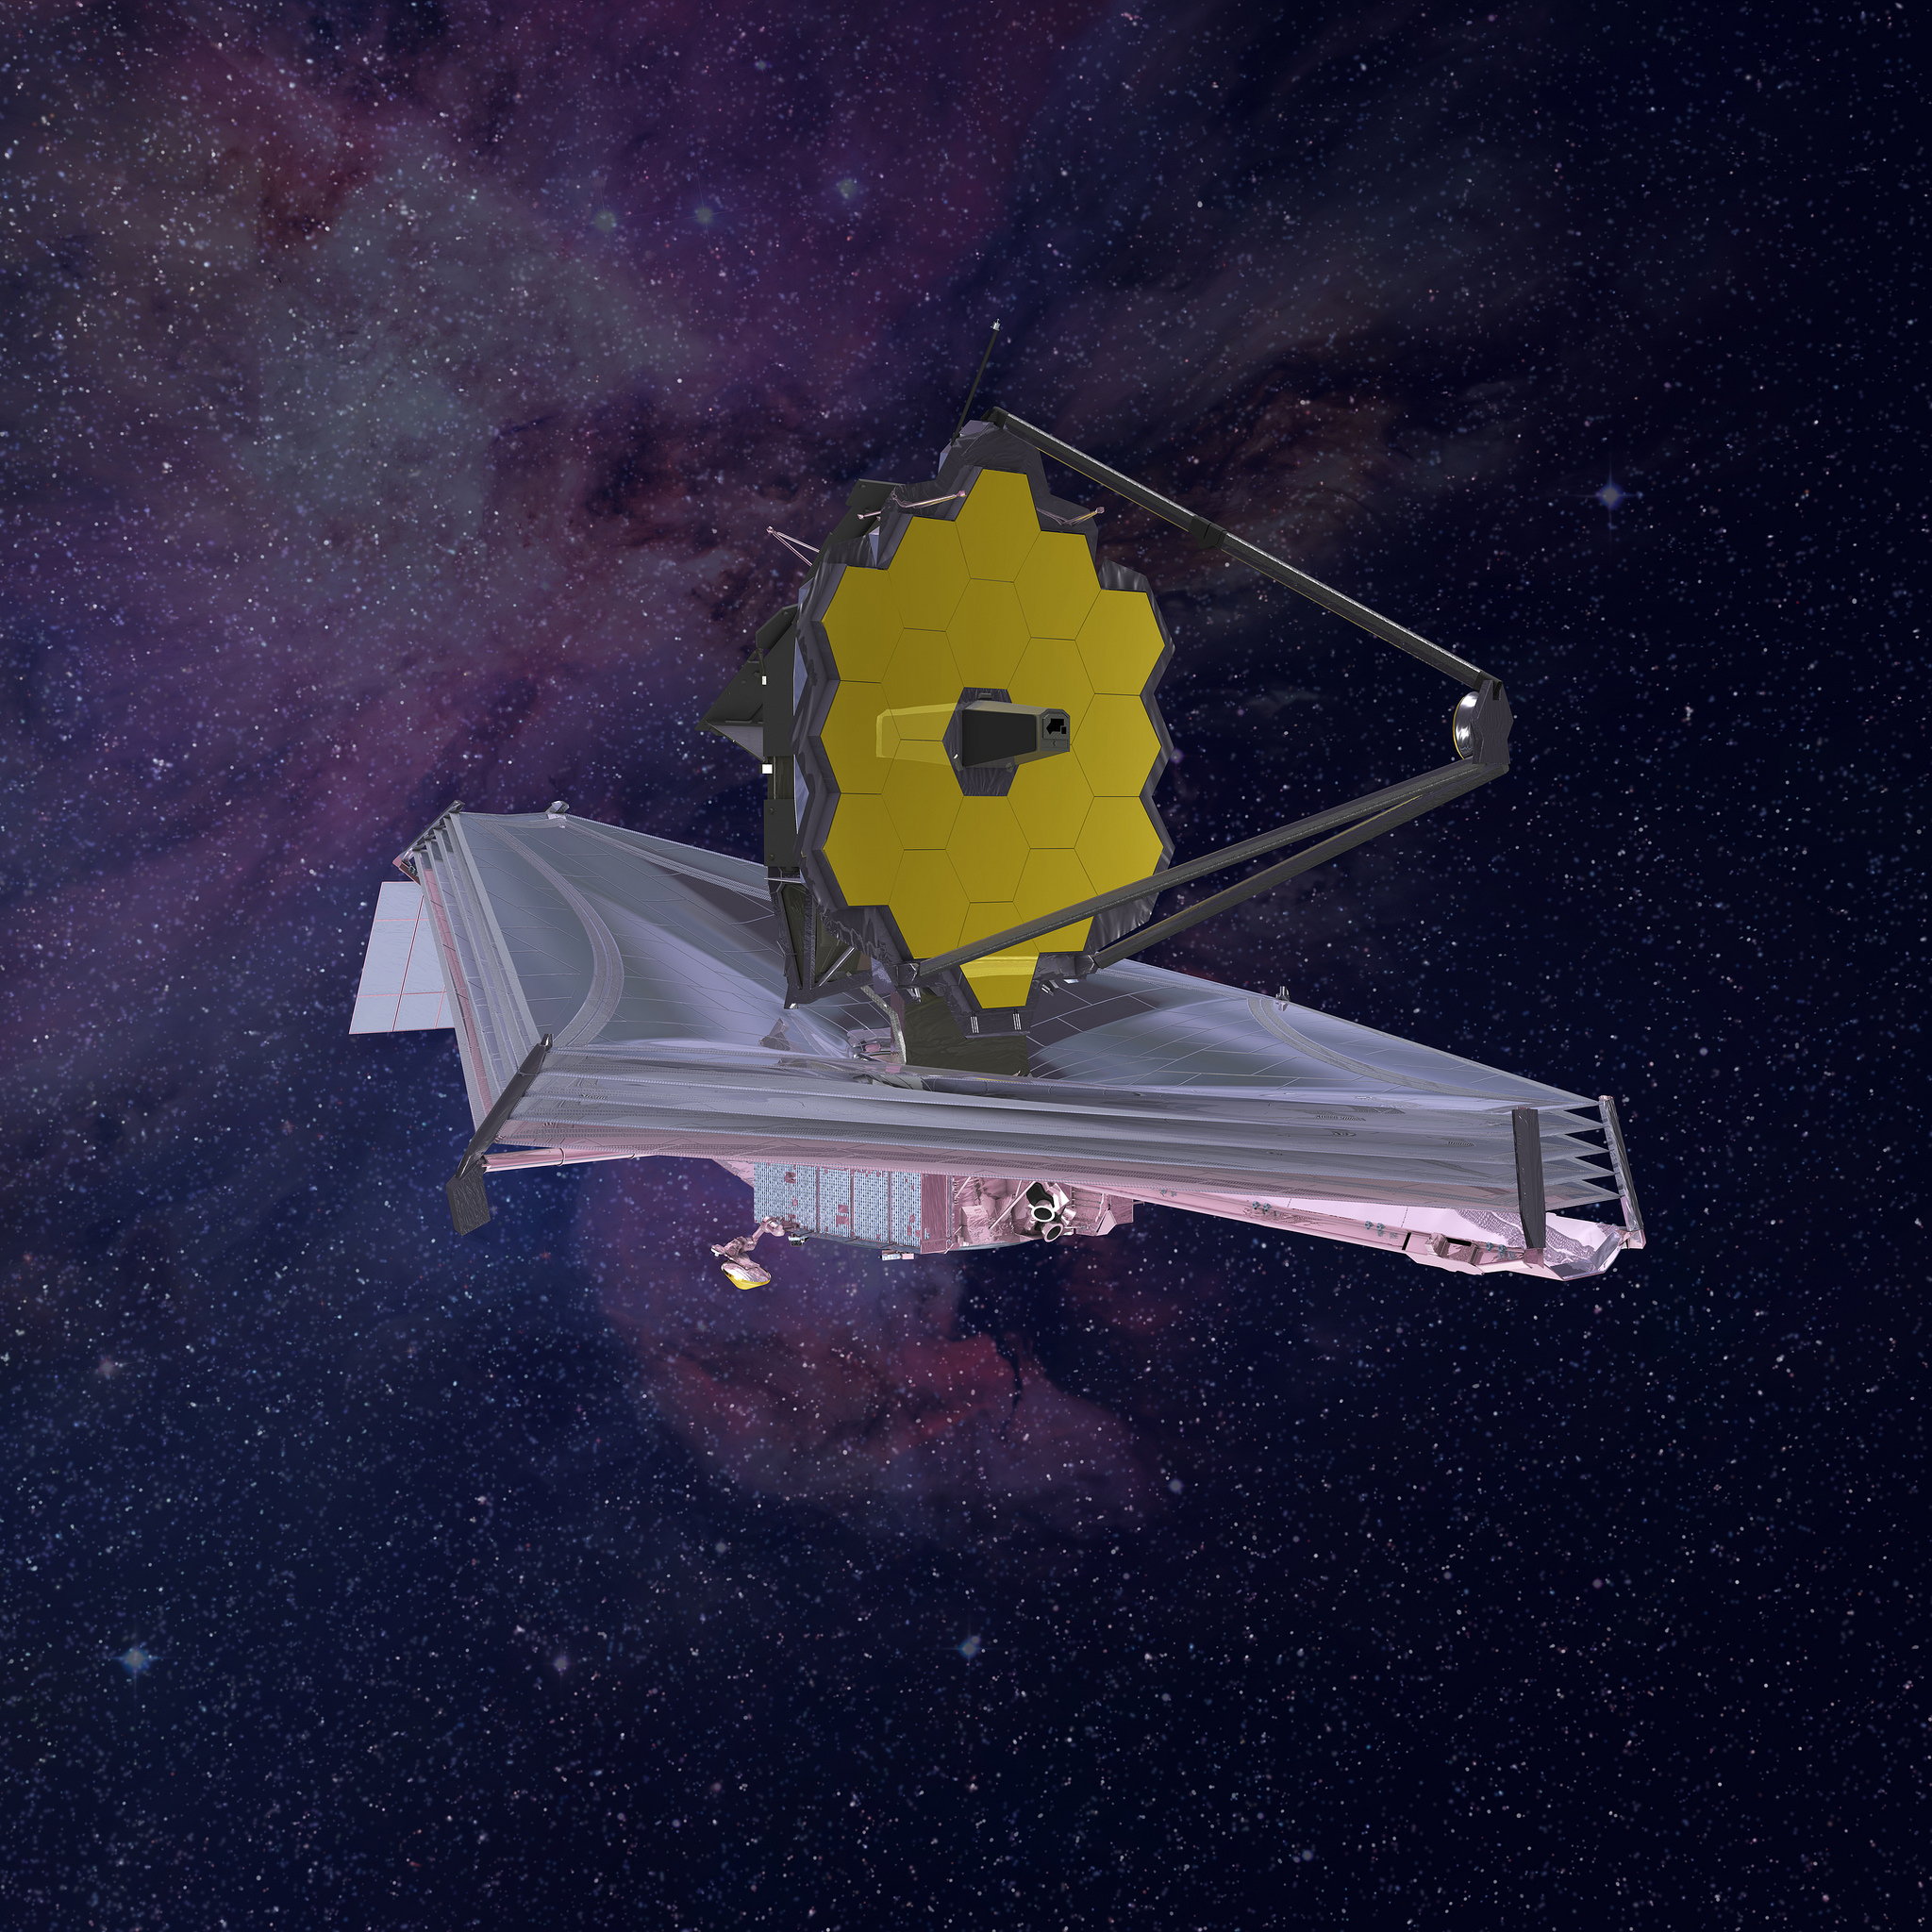 NASA's James Webb Space Telescope, which is scheduled to launch in 2018, will allow scientists to peer farther across the universe — and farther back in time — than ever before.